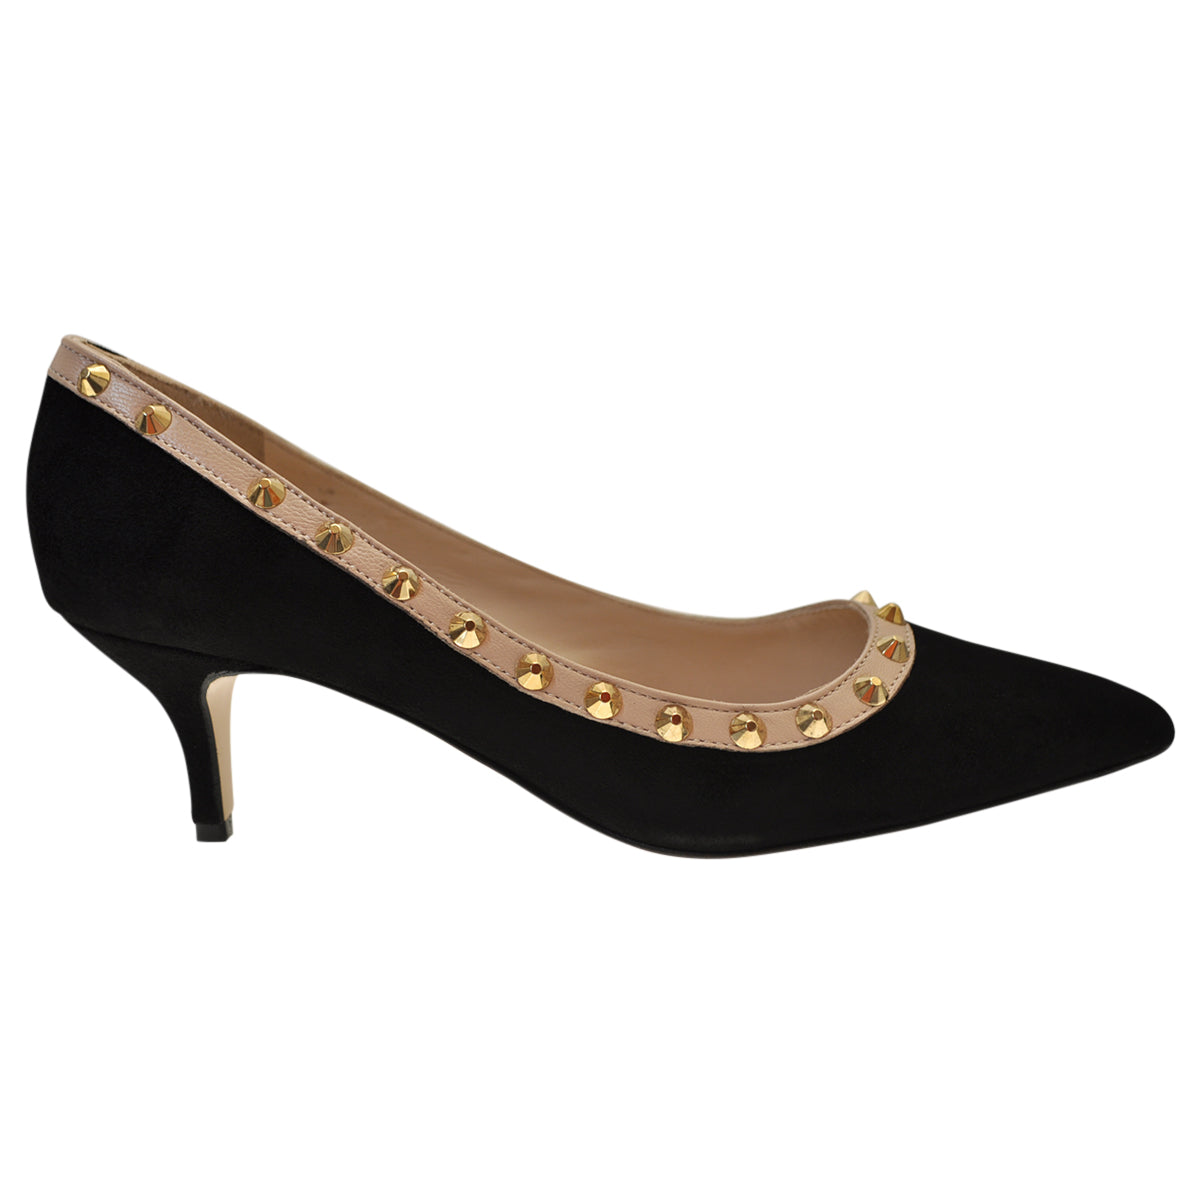 Black Suede kitten pumps with contrasting beige lining and studs. 